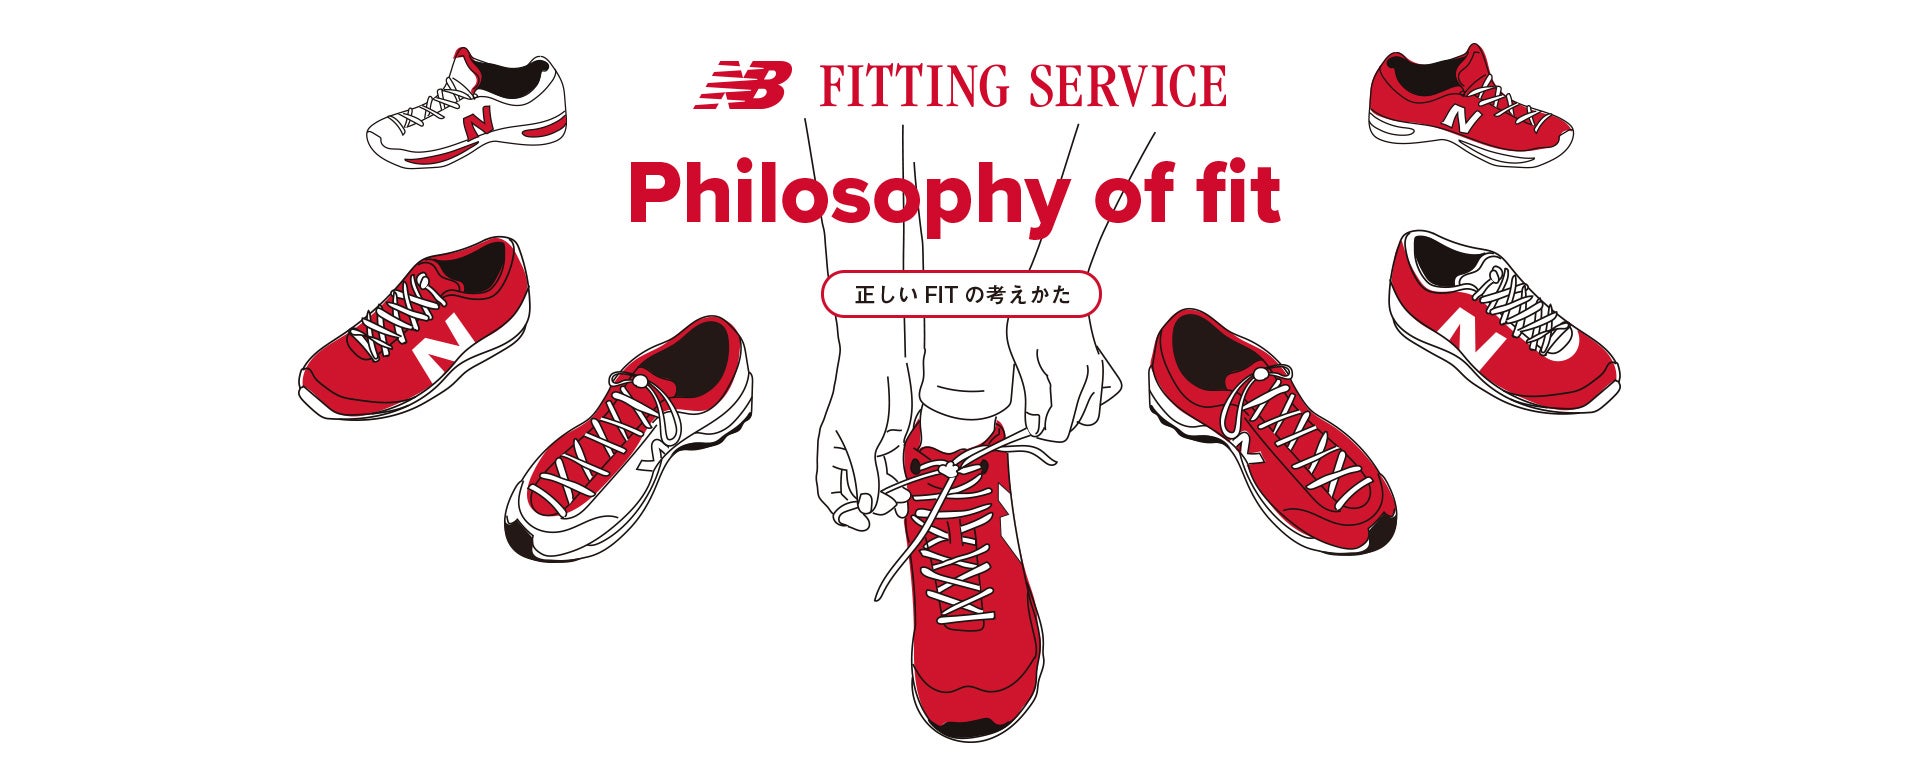 NB FITTING SERVICE